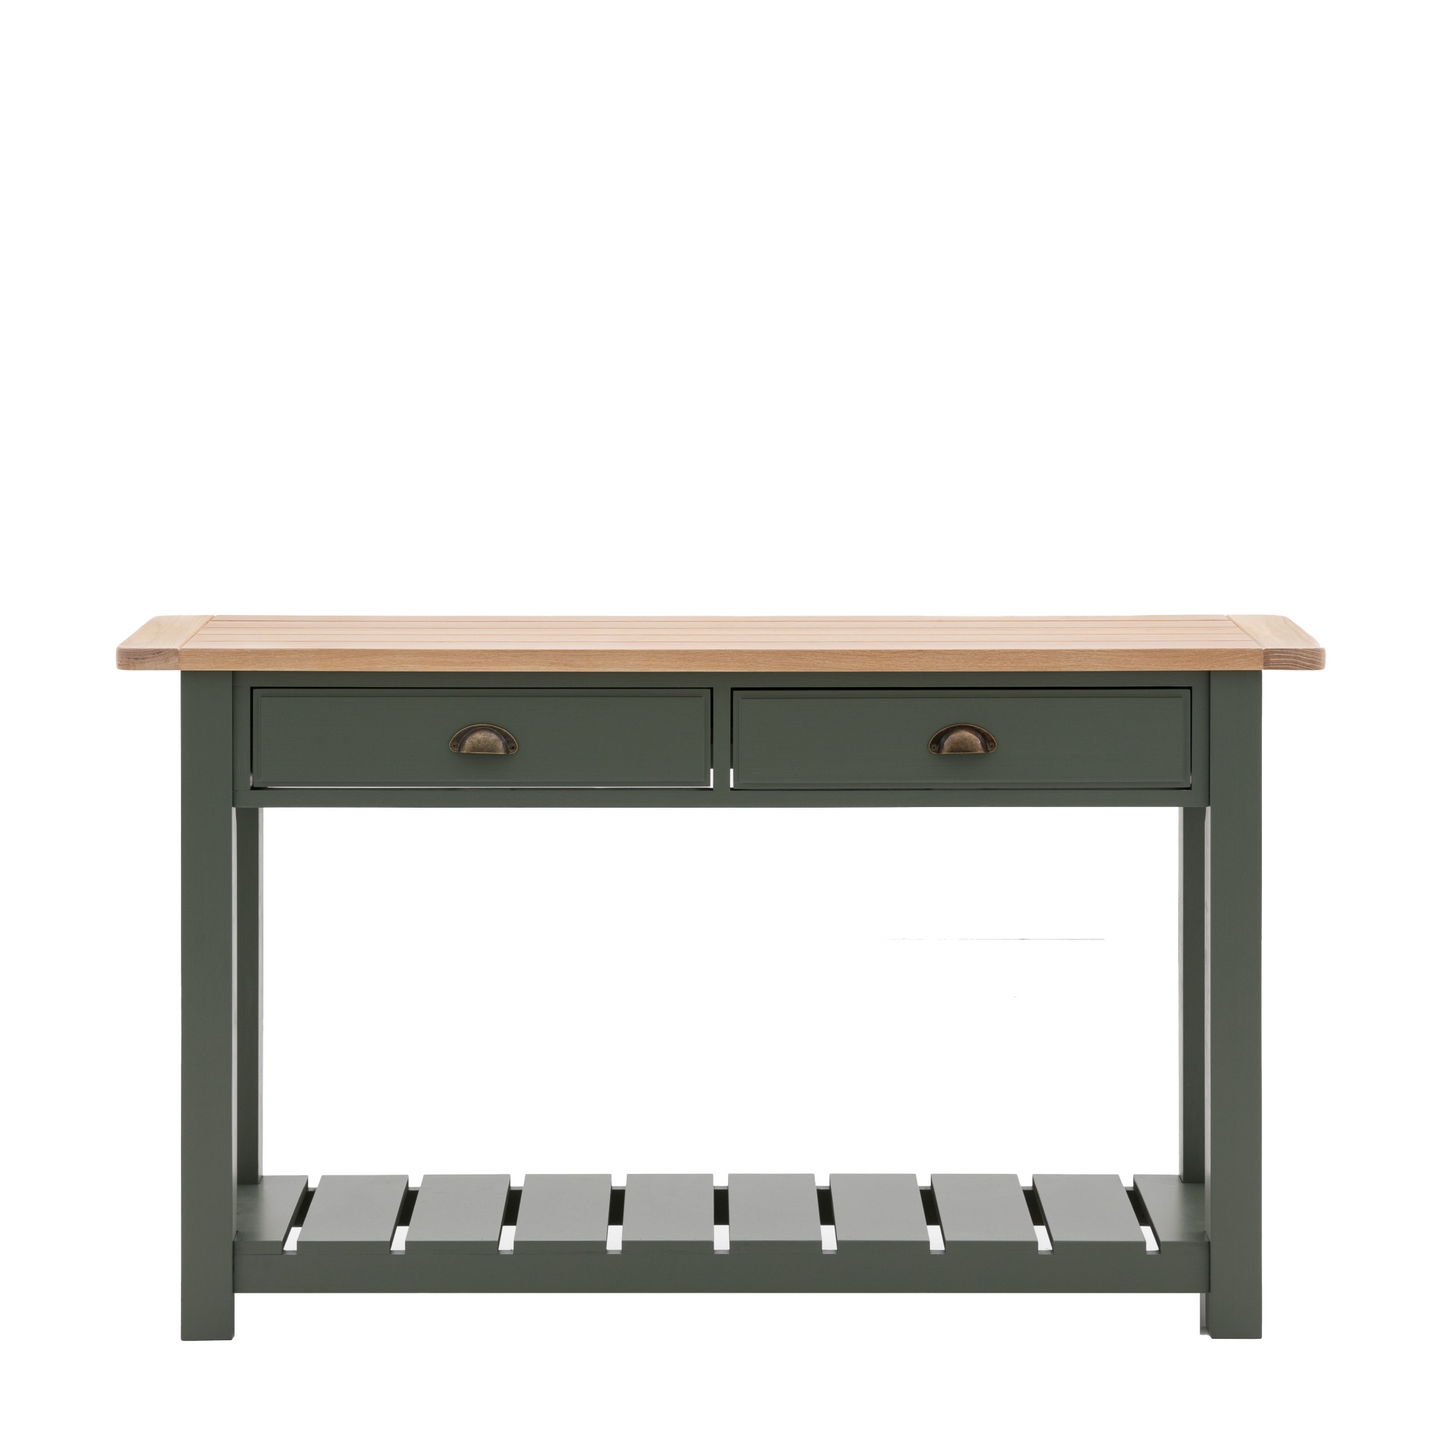 A Buckland Console Table (w)1400x(d)380x(h)800mm in Moss with two drawers for interior decor.